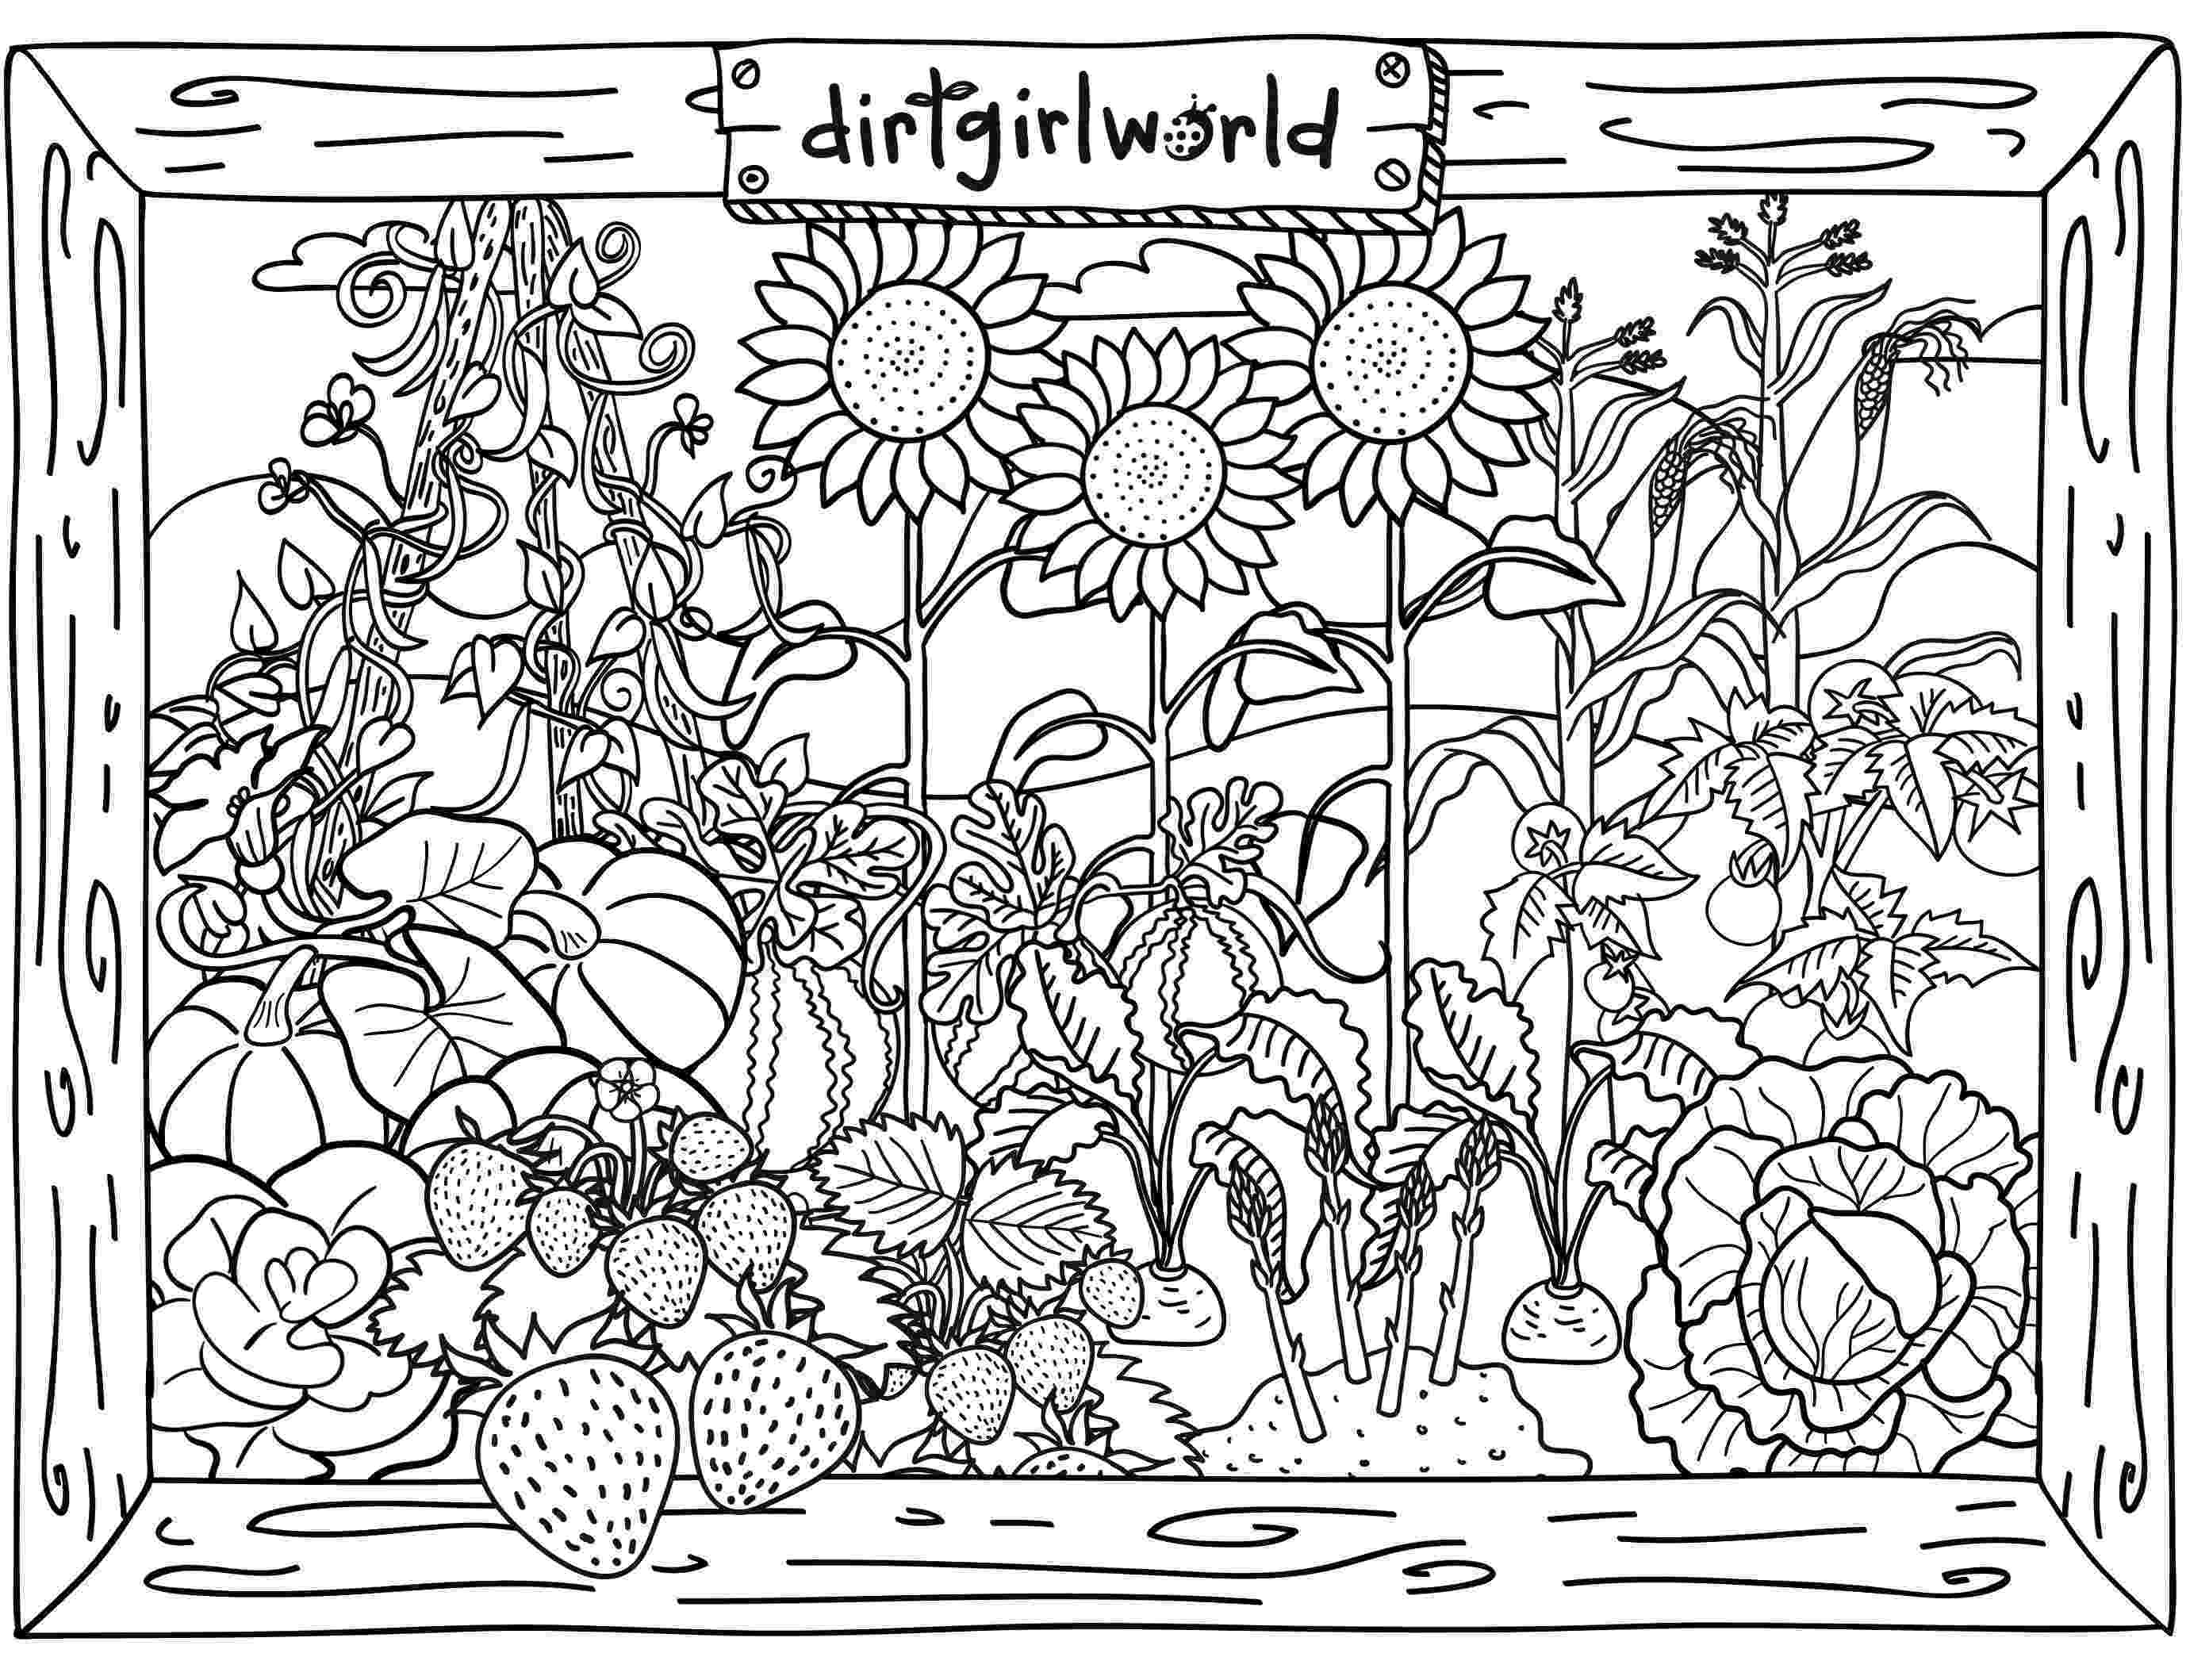 garden pictures to color flower garden coloring pages to download and print for free to garden pictures color 